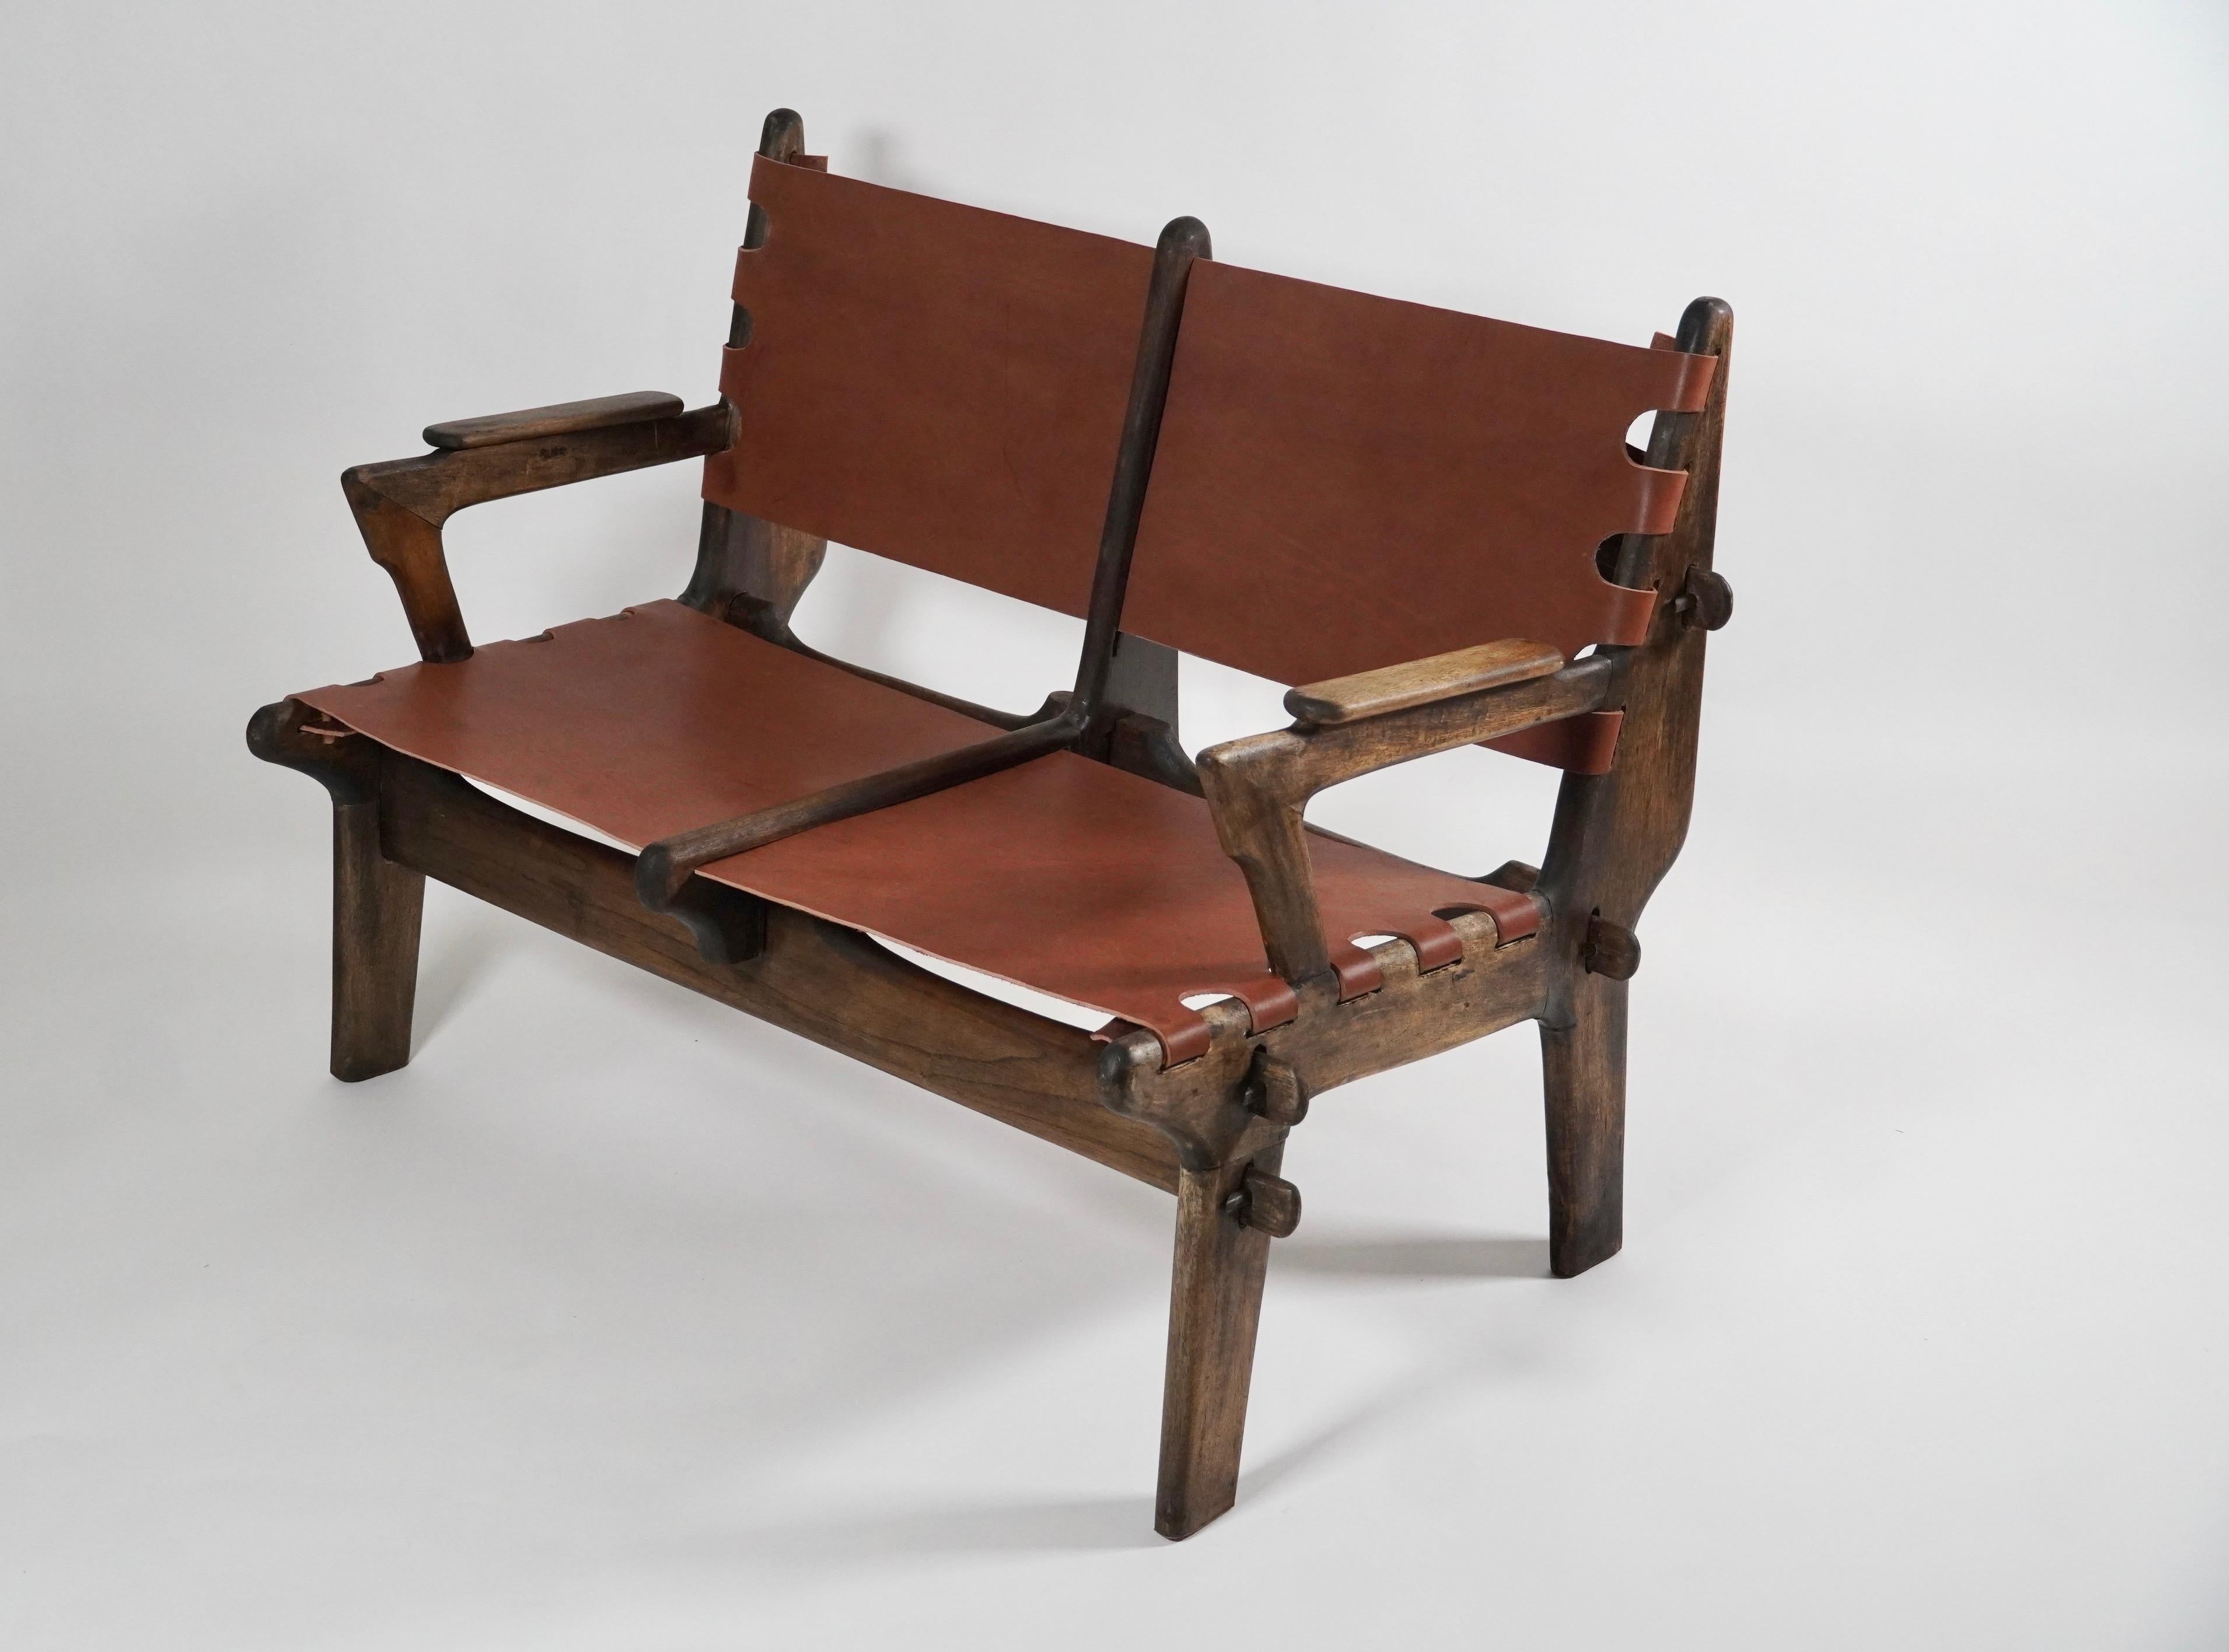 Settee by South American designer Angel Pazmino for Muebles de Estilo of Ecuador circa 1960s. Entirely hand made out of the indigenous tropical woods of Ecuador with a thick russet colored latigo leather upholstery. Held together via joints and a